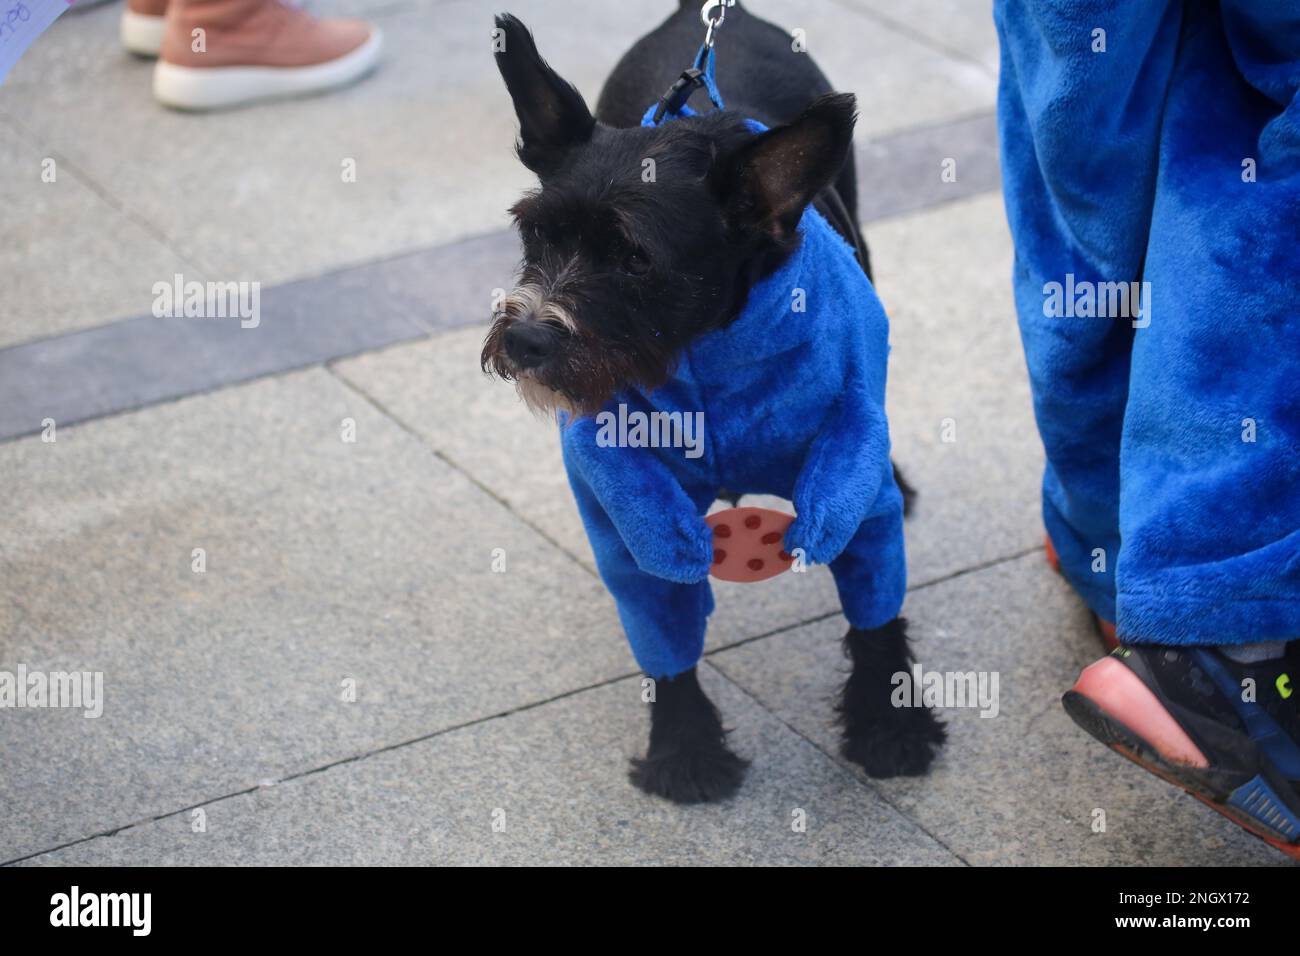 Aviles, Spain, 19th February, 2023: A dog dressed as the cookie monster during the Antroxaes Pet Contest on February 18, 2023, in Aviles, Spain. Credit: Alberto Brevers / Alamy Live News Stock Photo